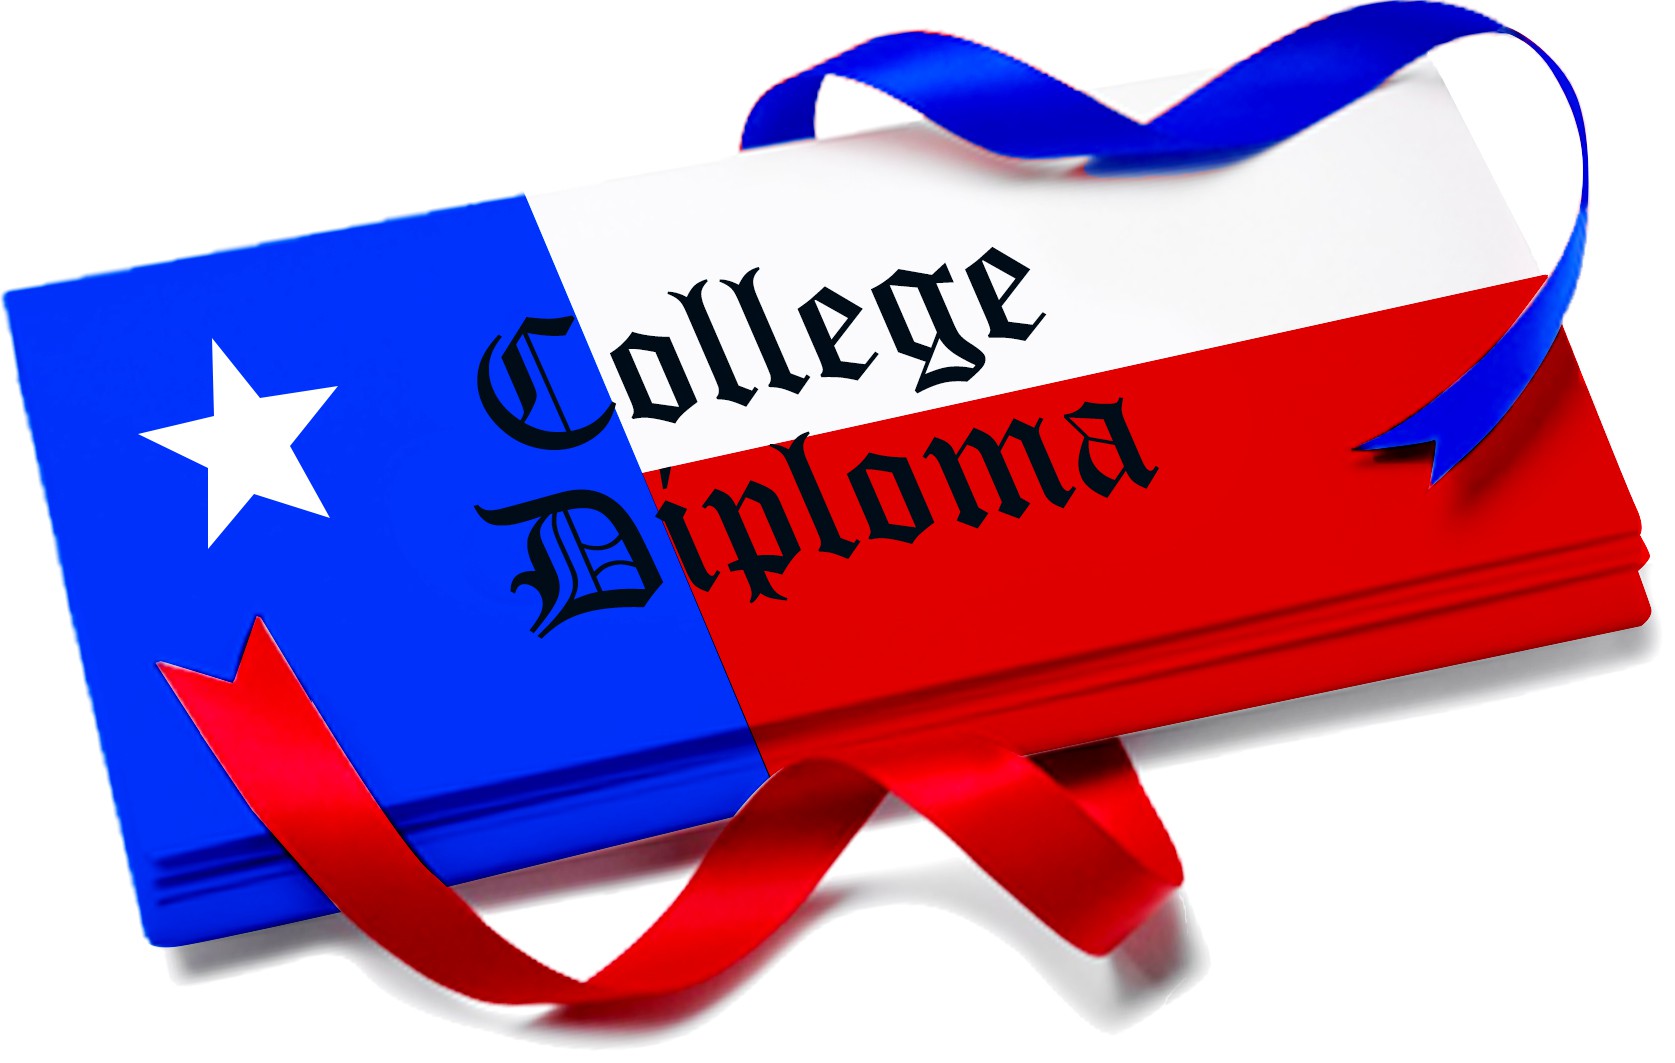 The University of Texas at Dallas College Diploma